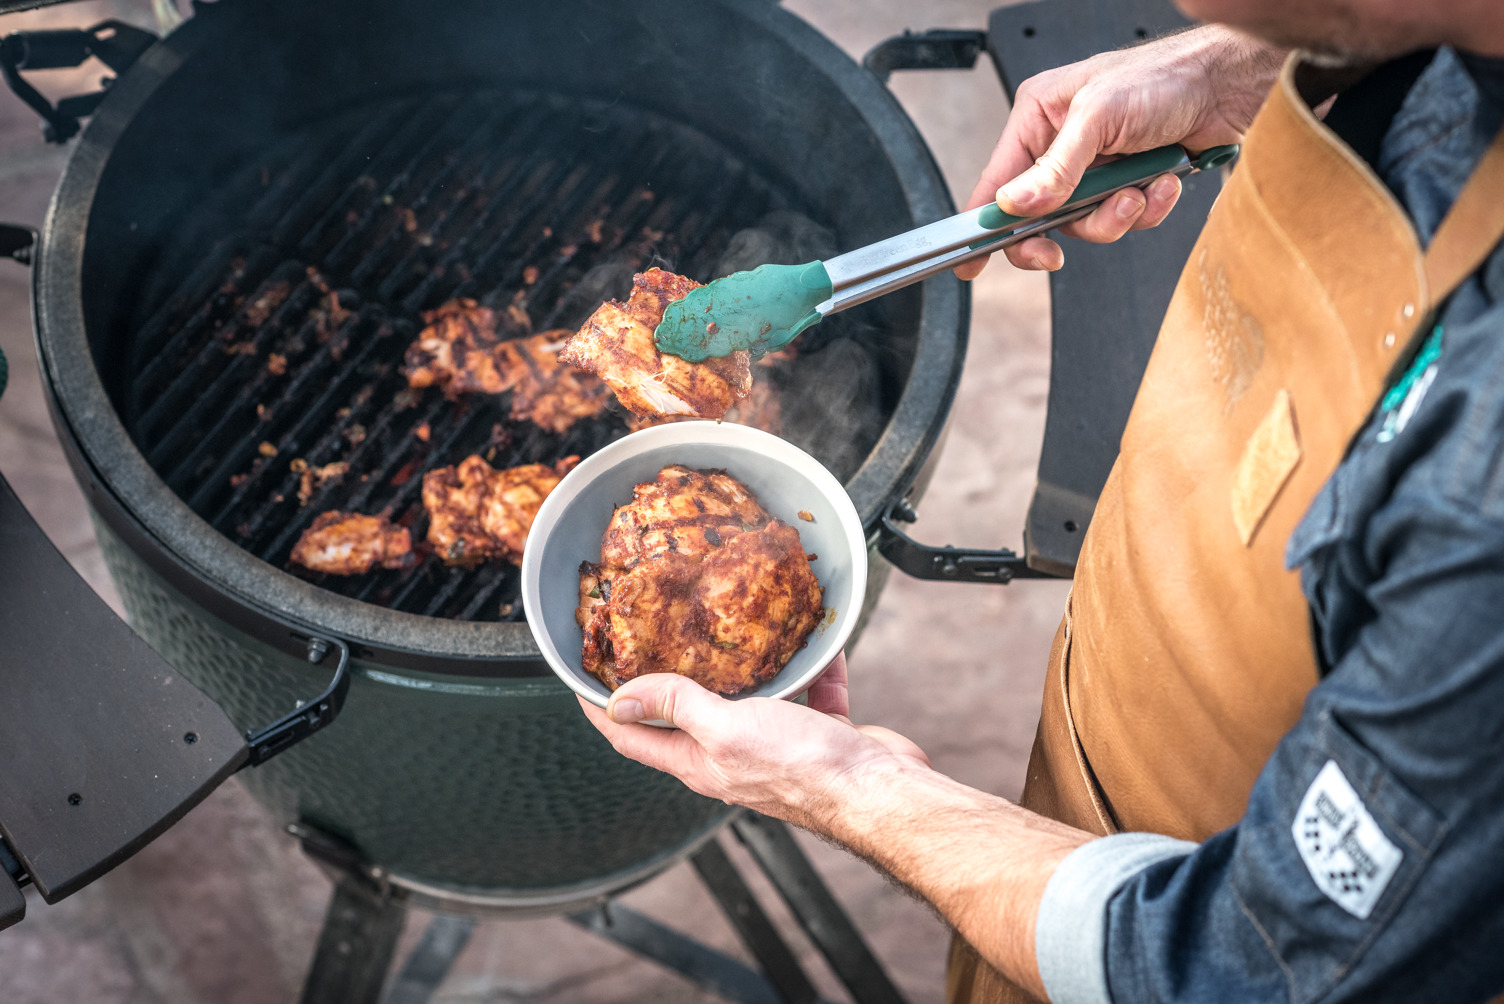 Healthy eating is easy with a Big Green Egg or Traeger Grill